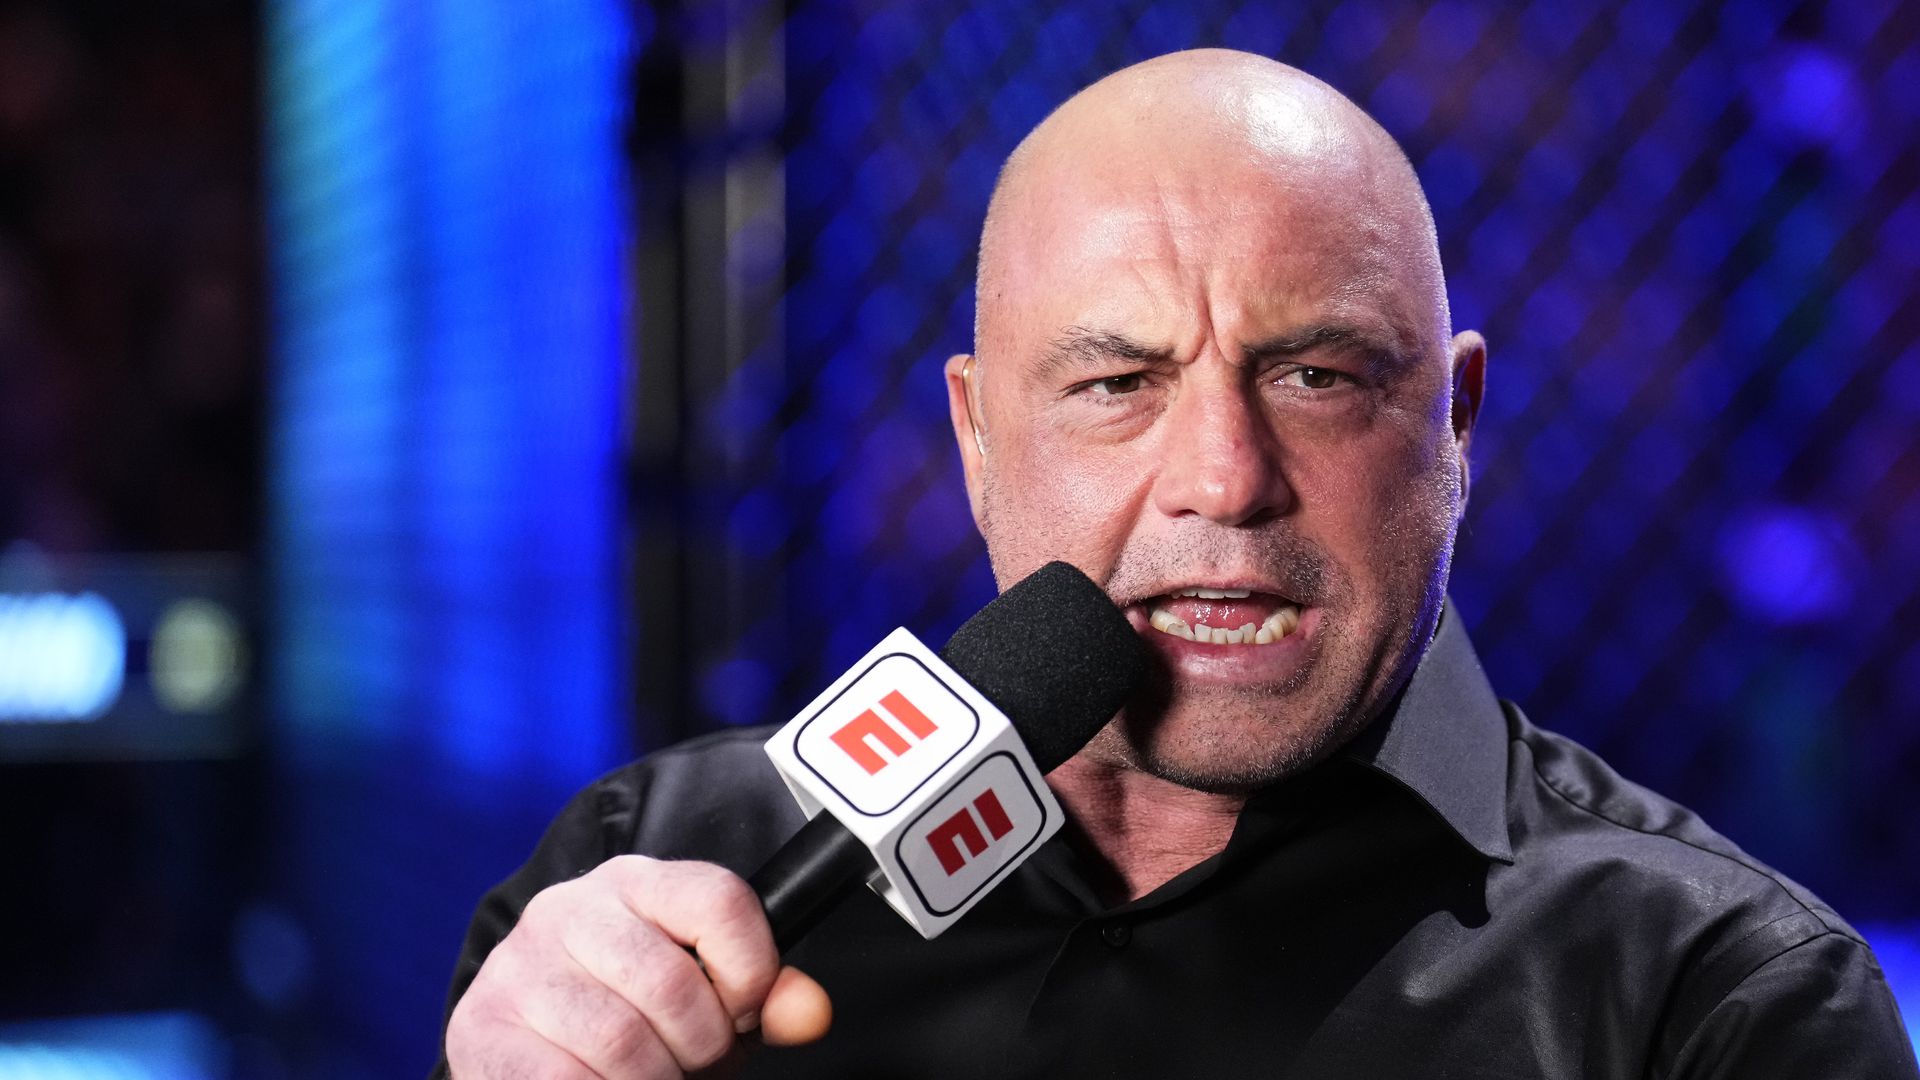 joe rogan warns fighters outside ufc that they are often ‘wasting their career’: ‘no one’s watching’